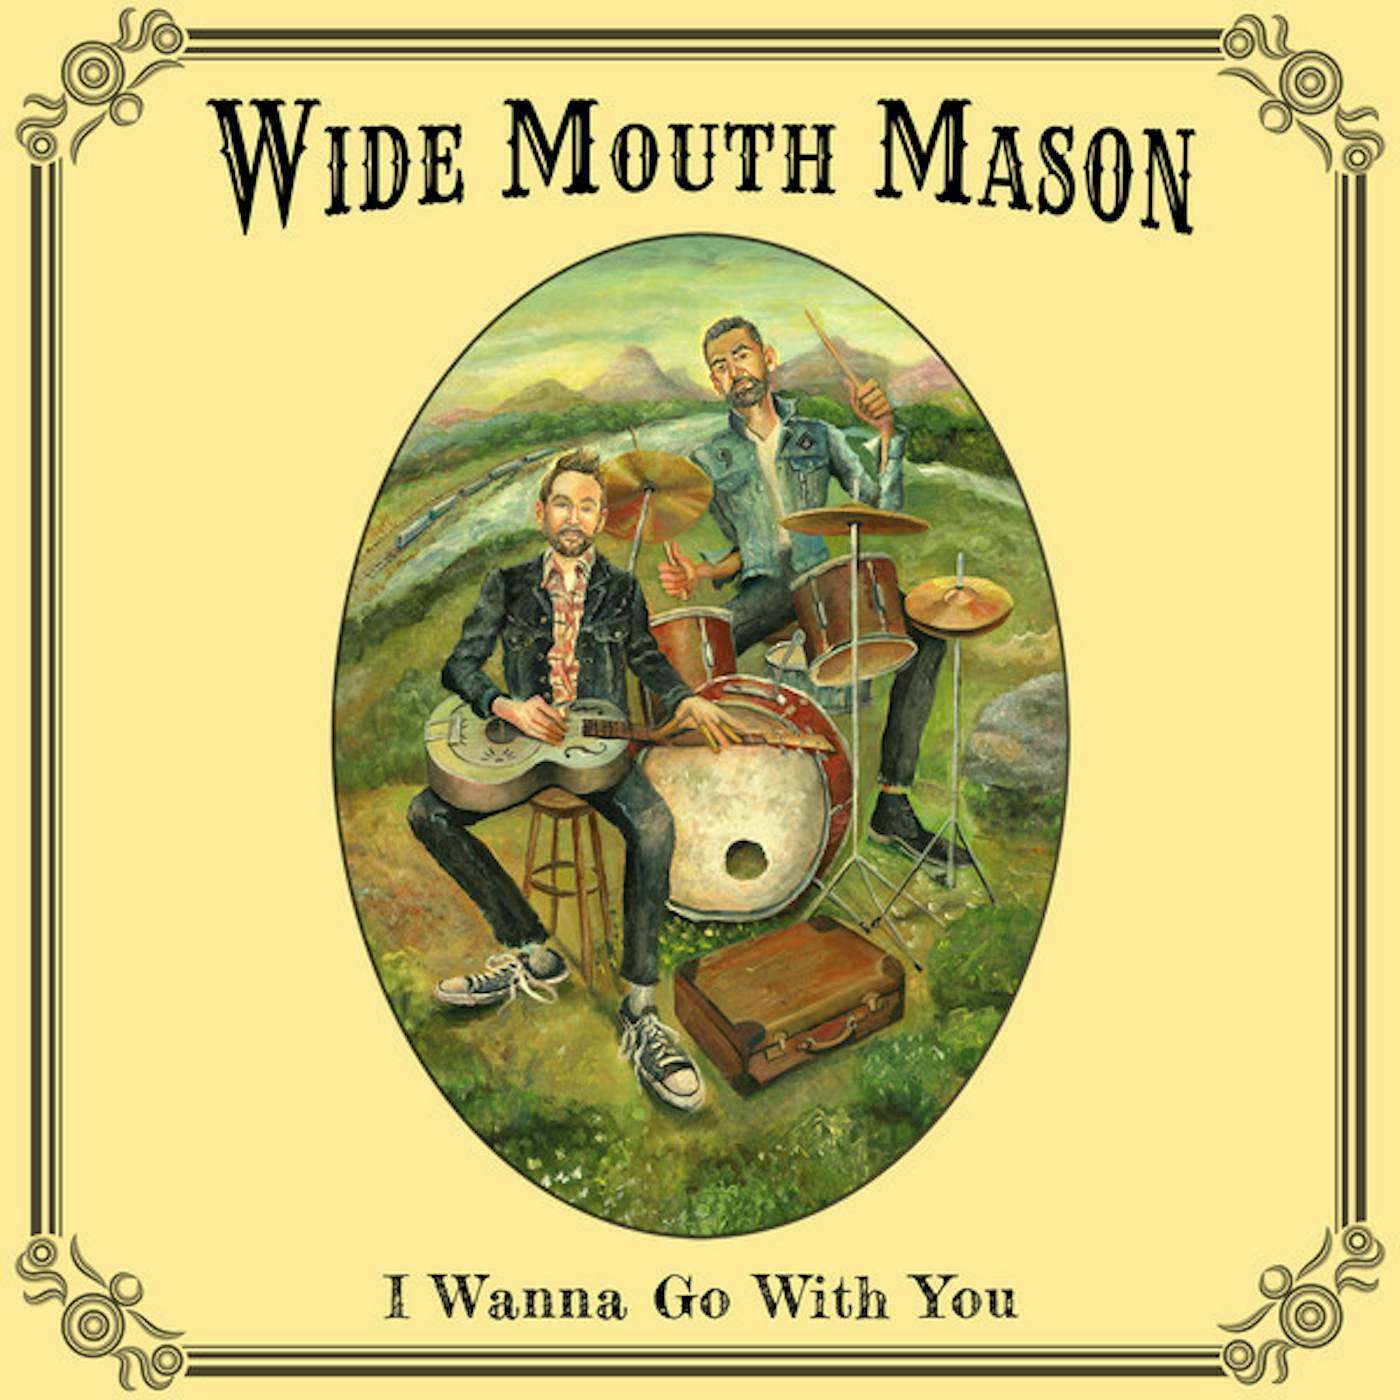 Wide Mouth Mason I Wanna Go With You Vinyl Record